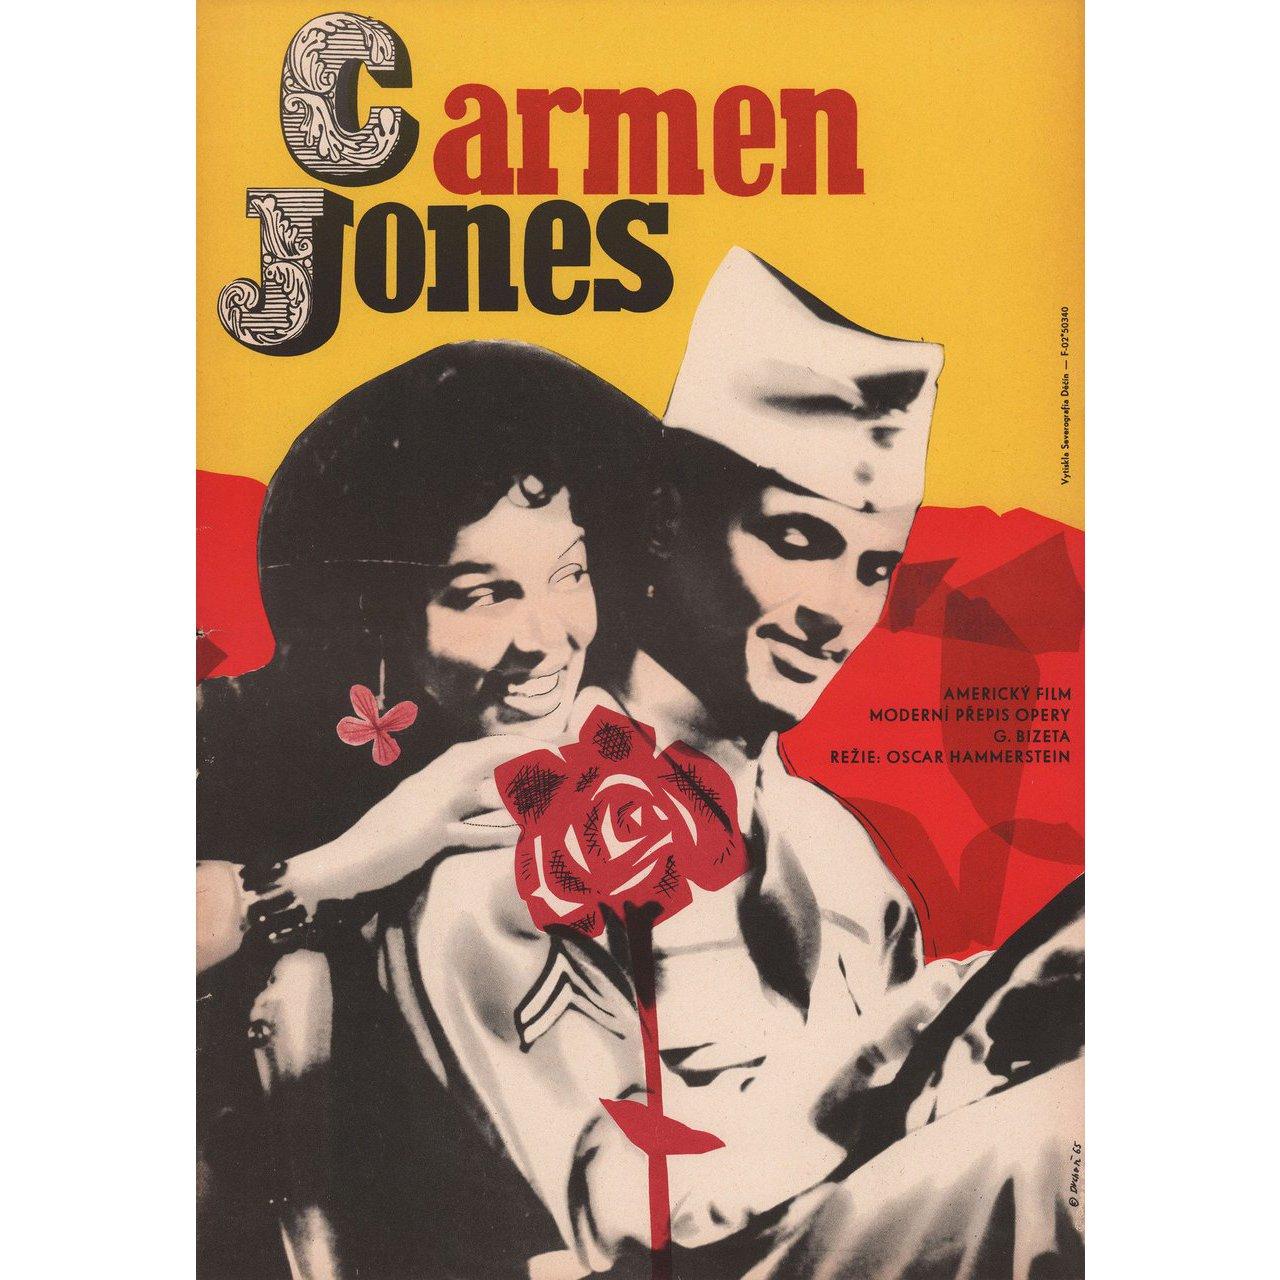 Original 1965 Czech A1 poster by Josef Duchon for the 1954 film Carmen Jones directed by Otto Preminger with Harry Belafonte / Dorothy Dandridge / Pearl Bailey / Olga James. Very Good-Fine condition, folded with edge wear on top. Many original